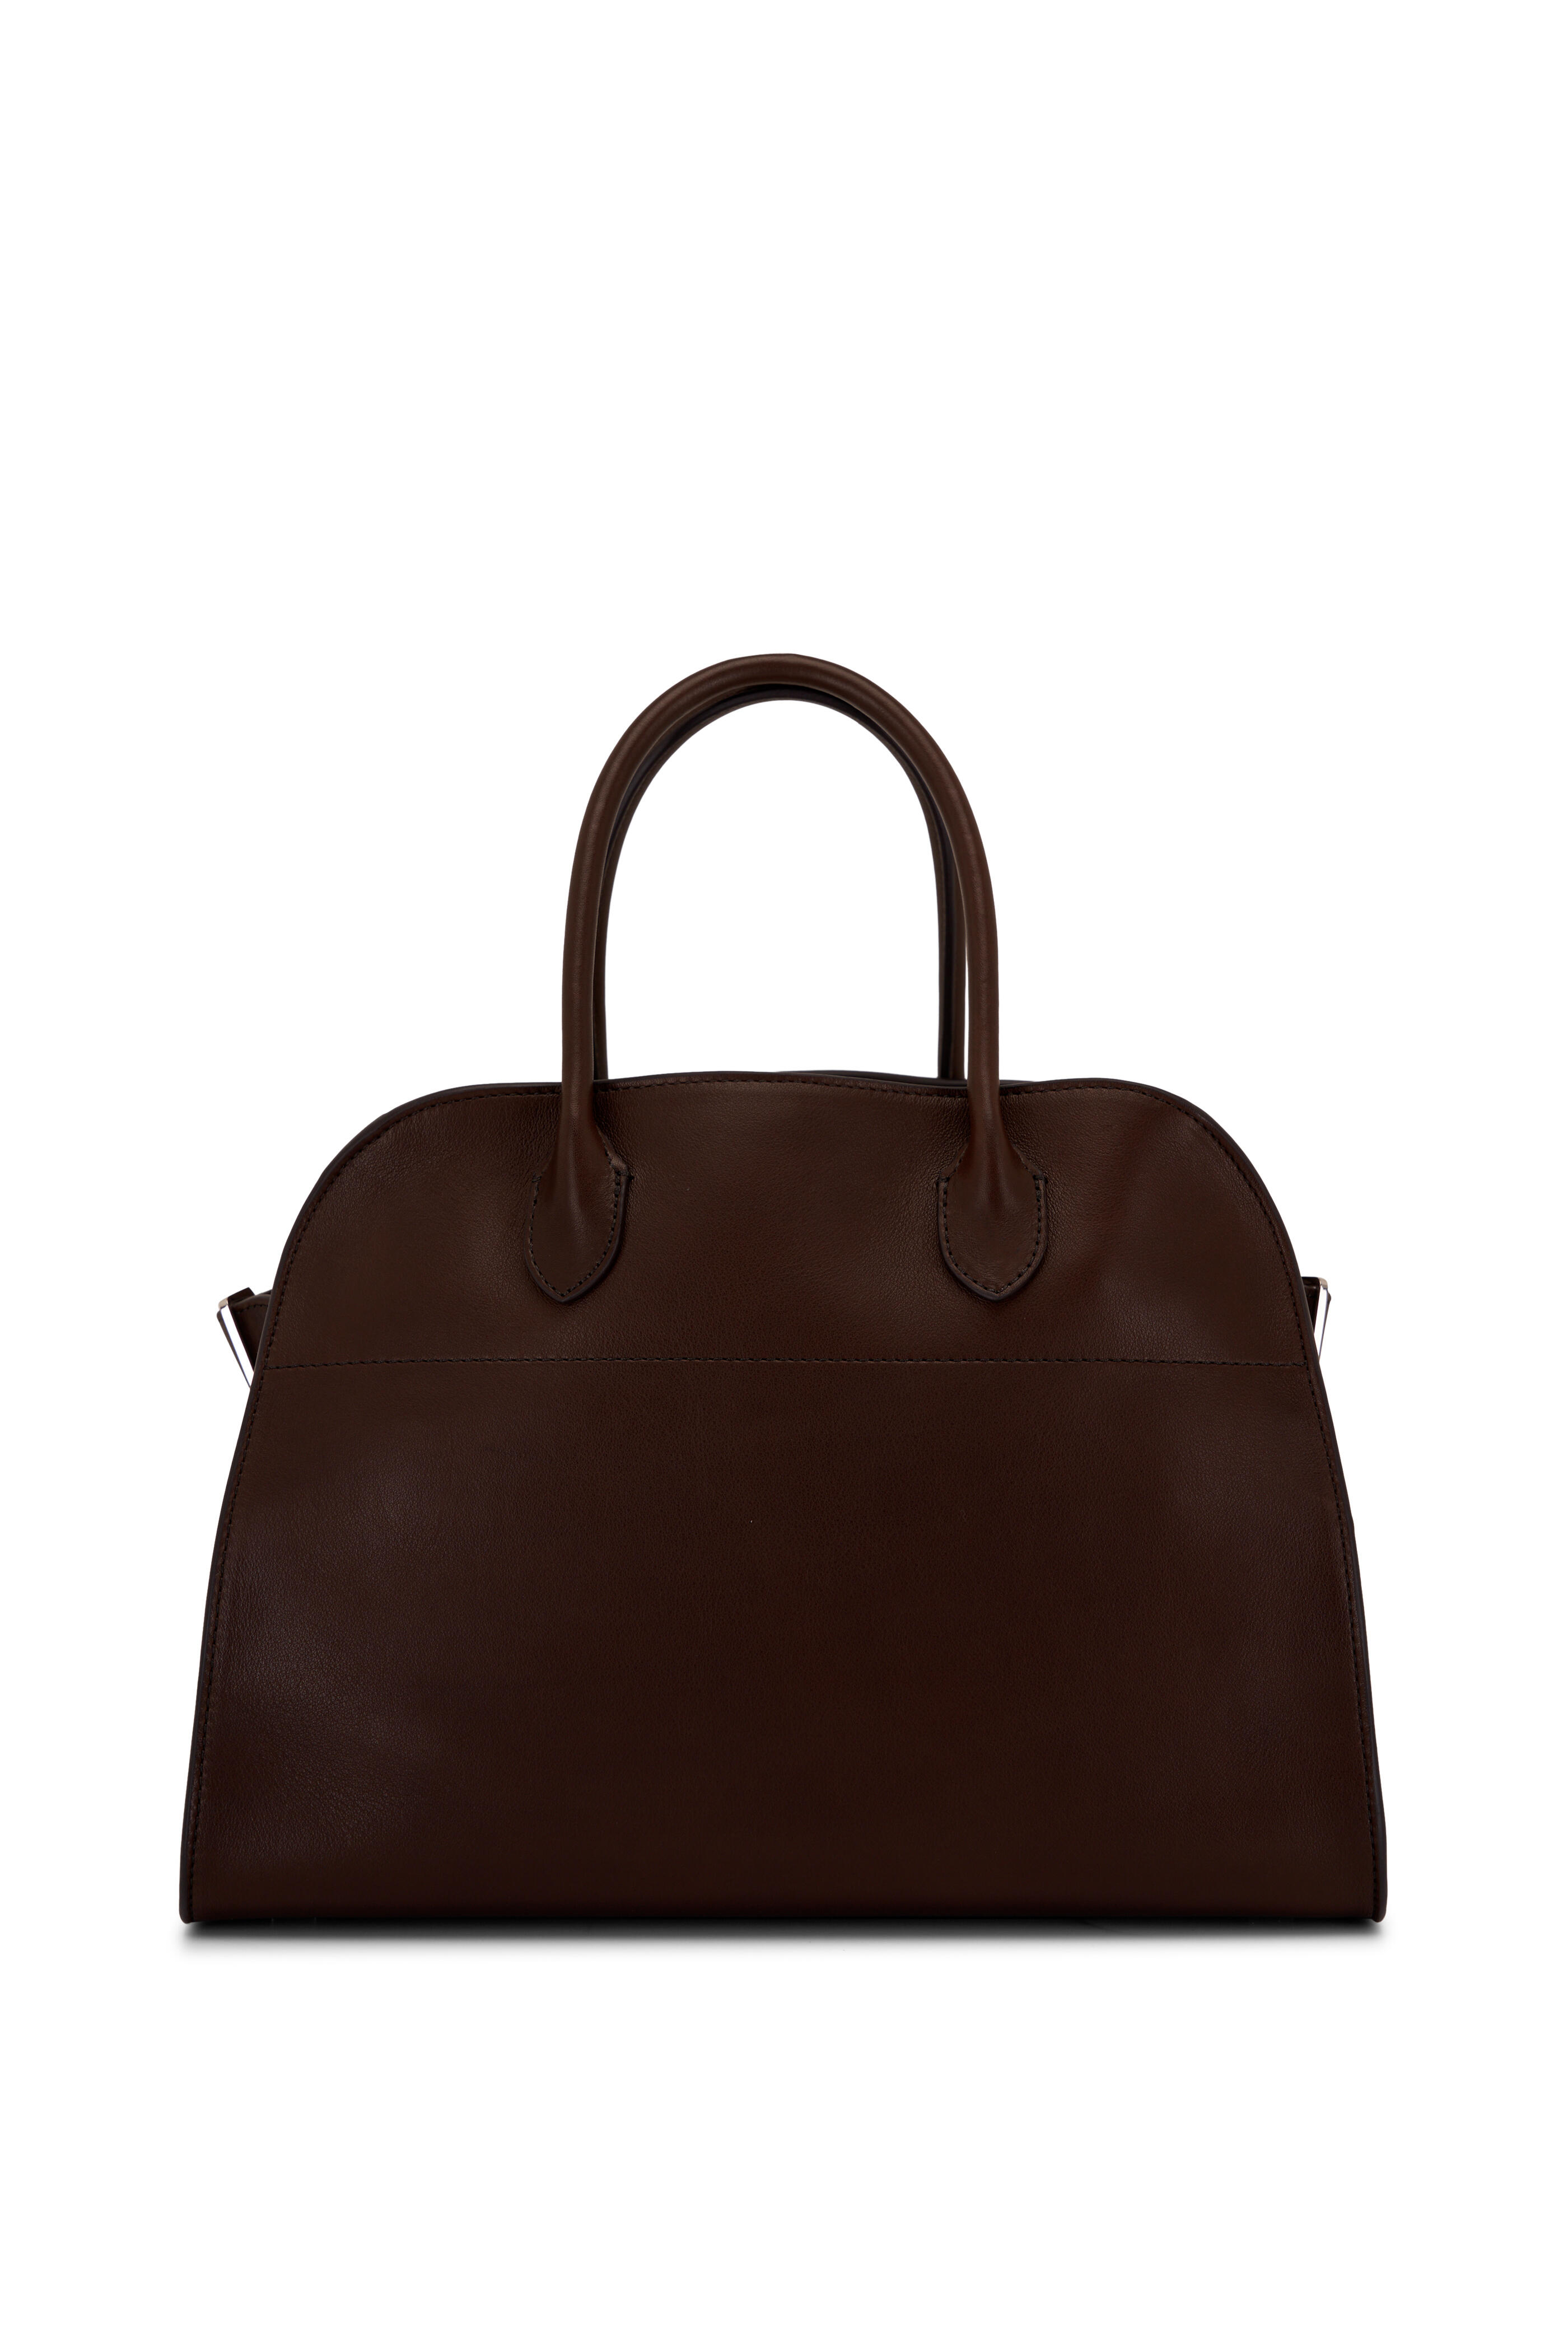 The Row Margaux 15 Leather Handbag in Brown